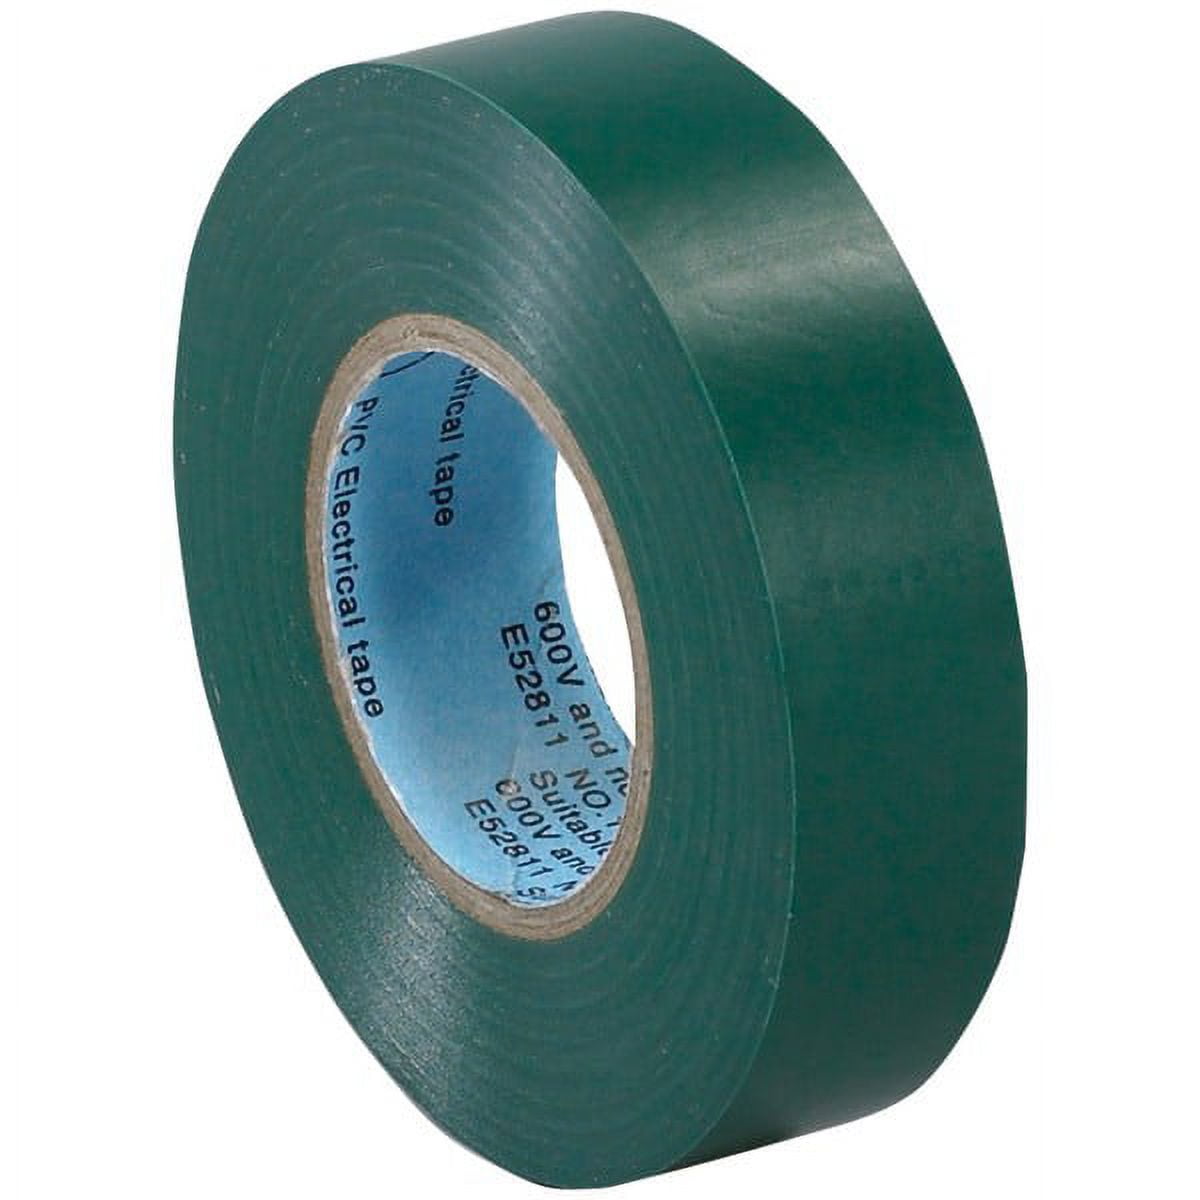 T964618g 0.75 In. X 20 Yards Green Electrical Tape - Case Of 200